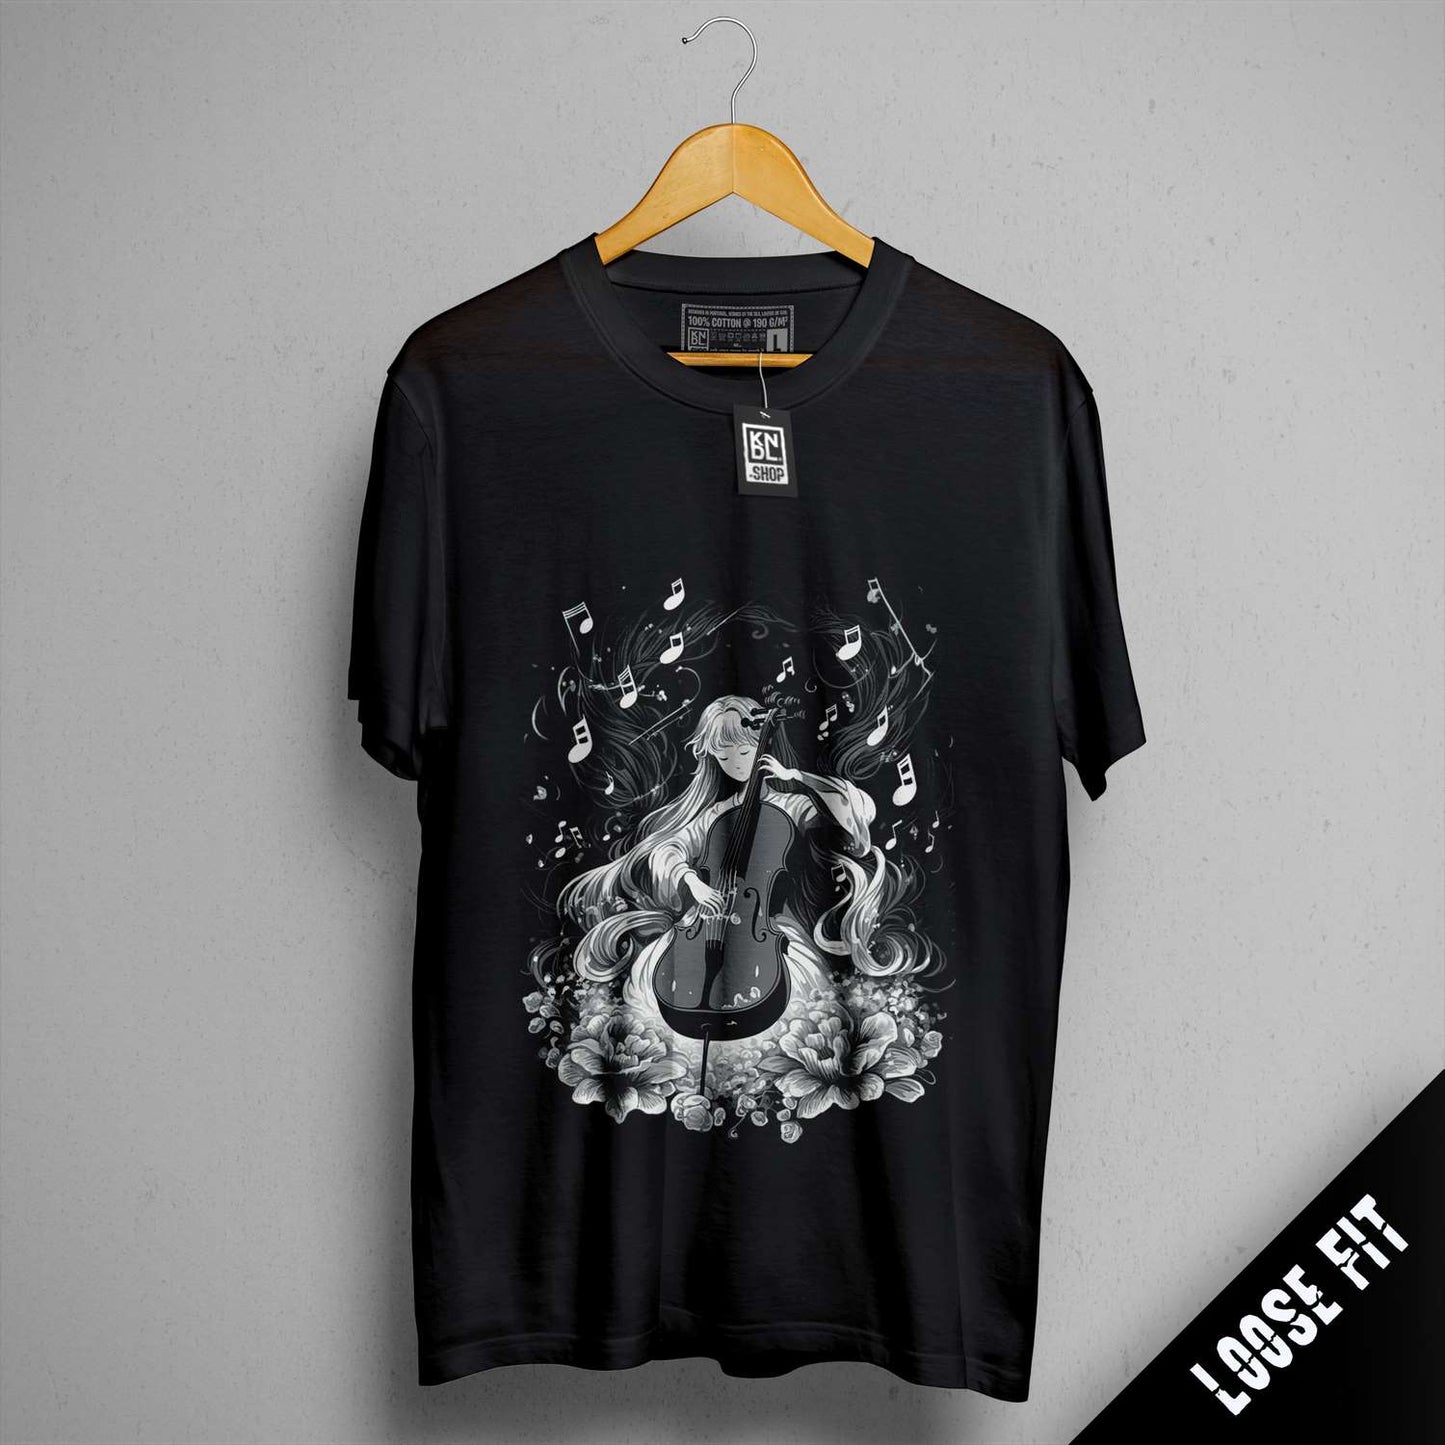 a black t - shirt with an image of a woman playing a violin